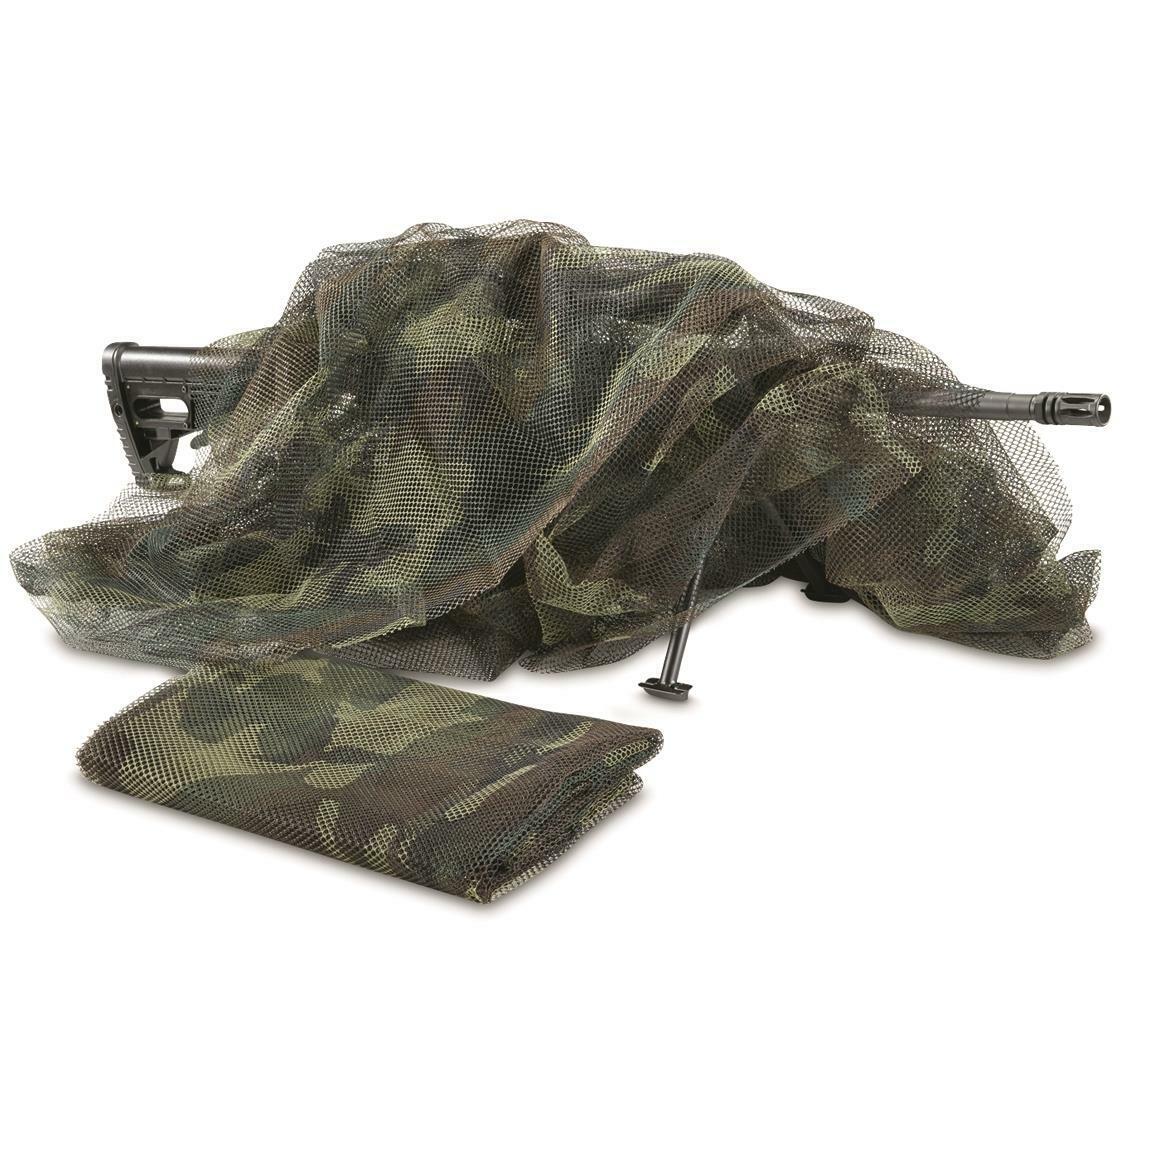 Military Woodland Sniper Veil - Army Mesh Camo Netting - Made in USA - 5' x 8'